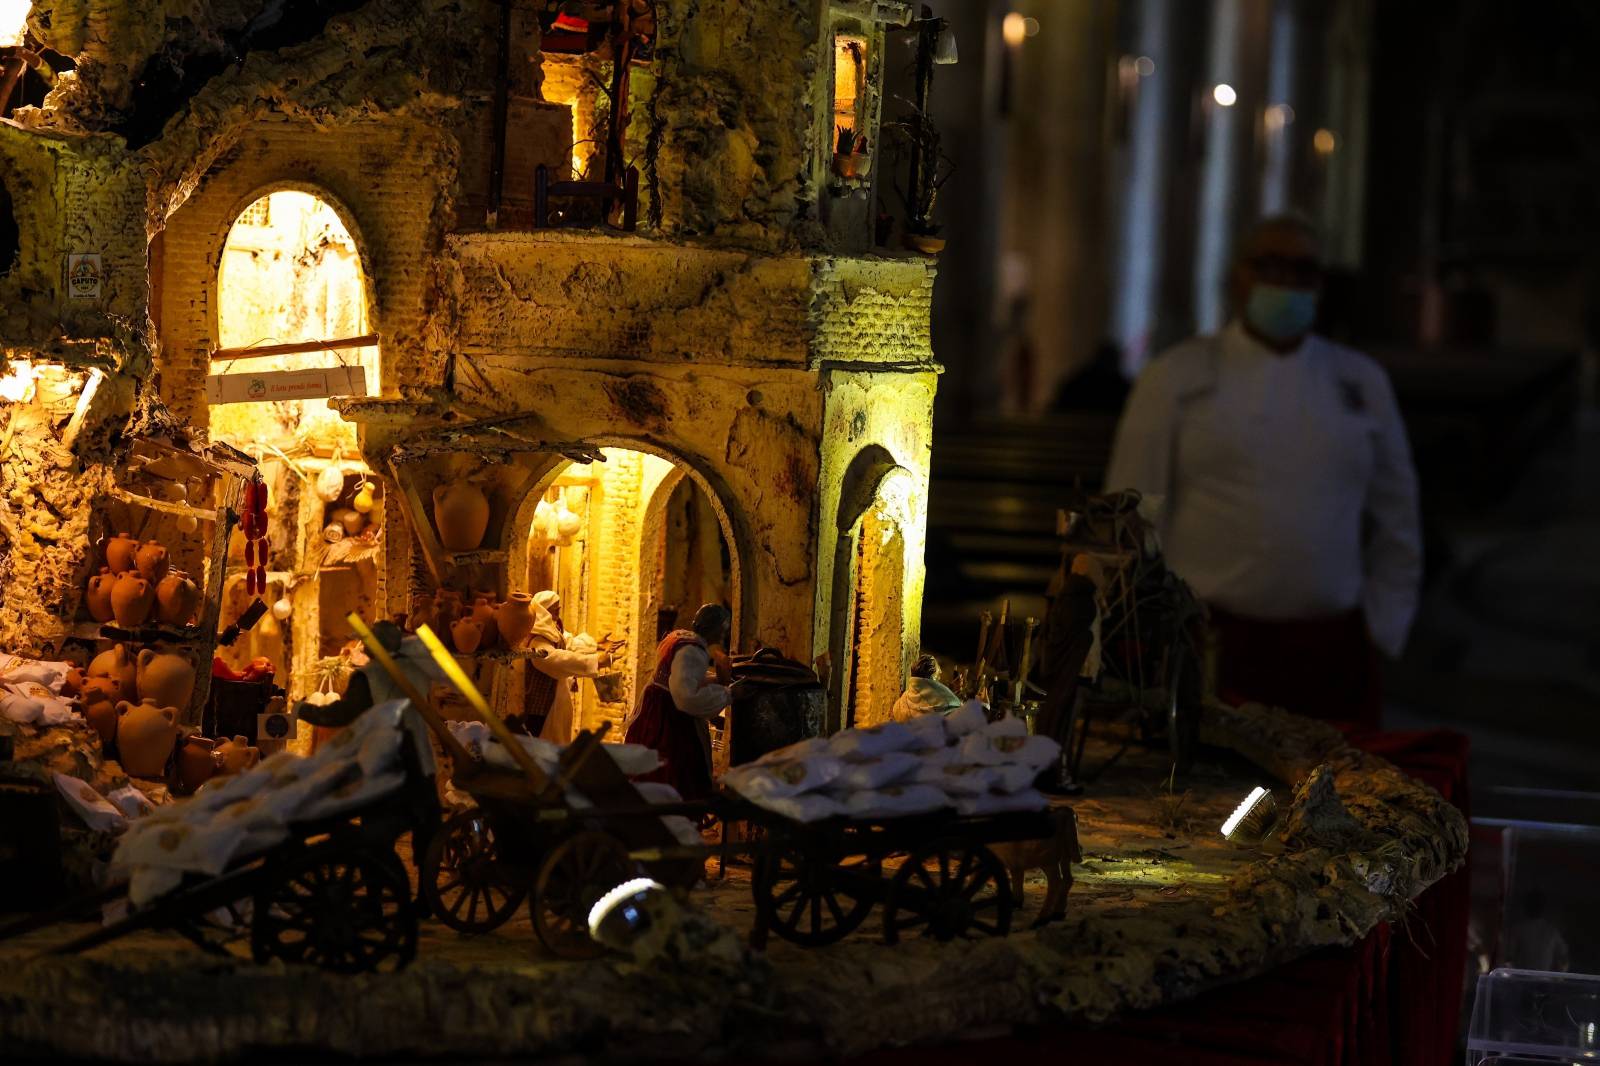 A large nativity scene whose base is also made of pizza to celebrate Christmas in the Basilica of Santa Chiara